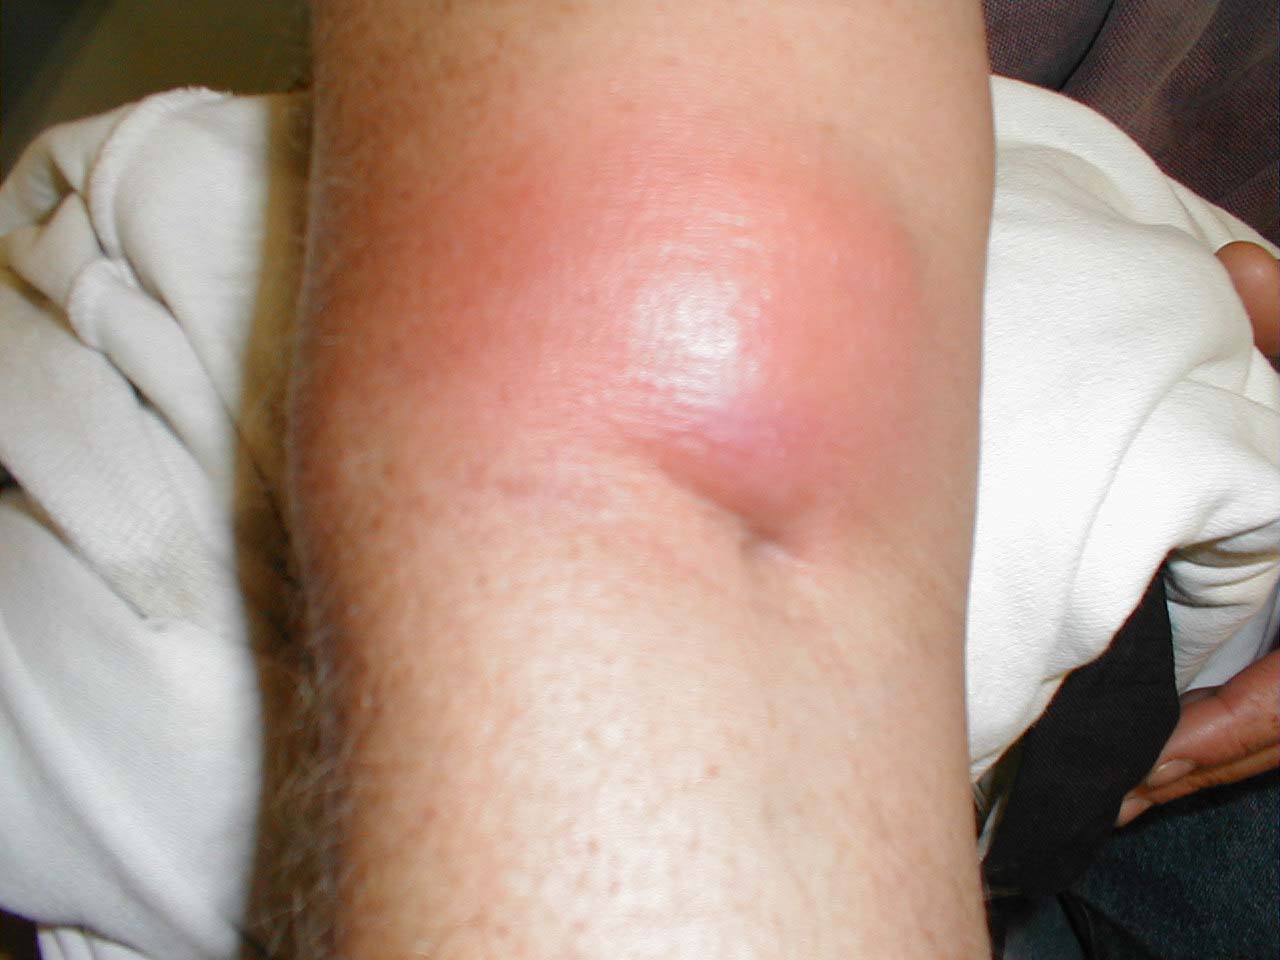 Recurrent Cellulitis: Robust Information From an RCT